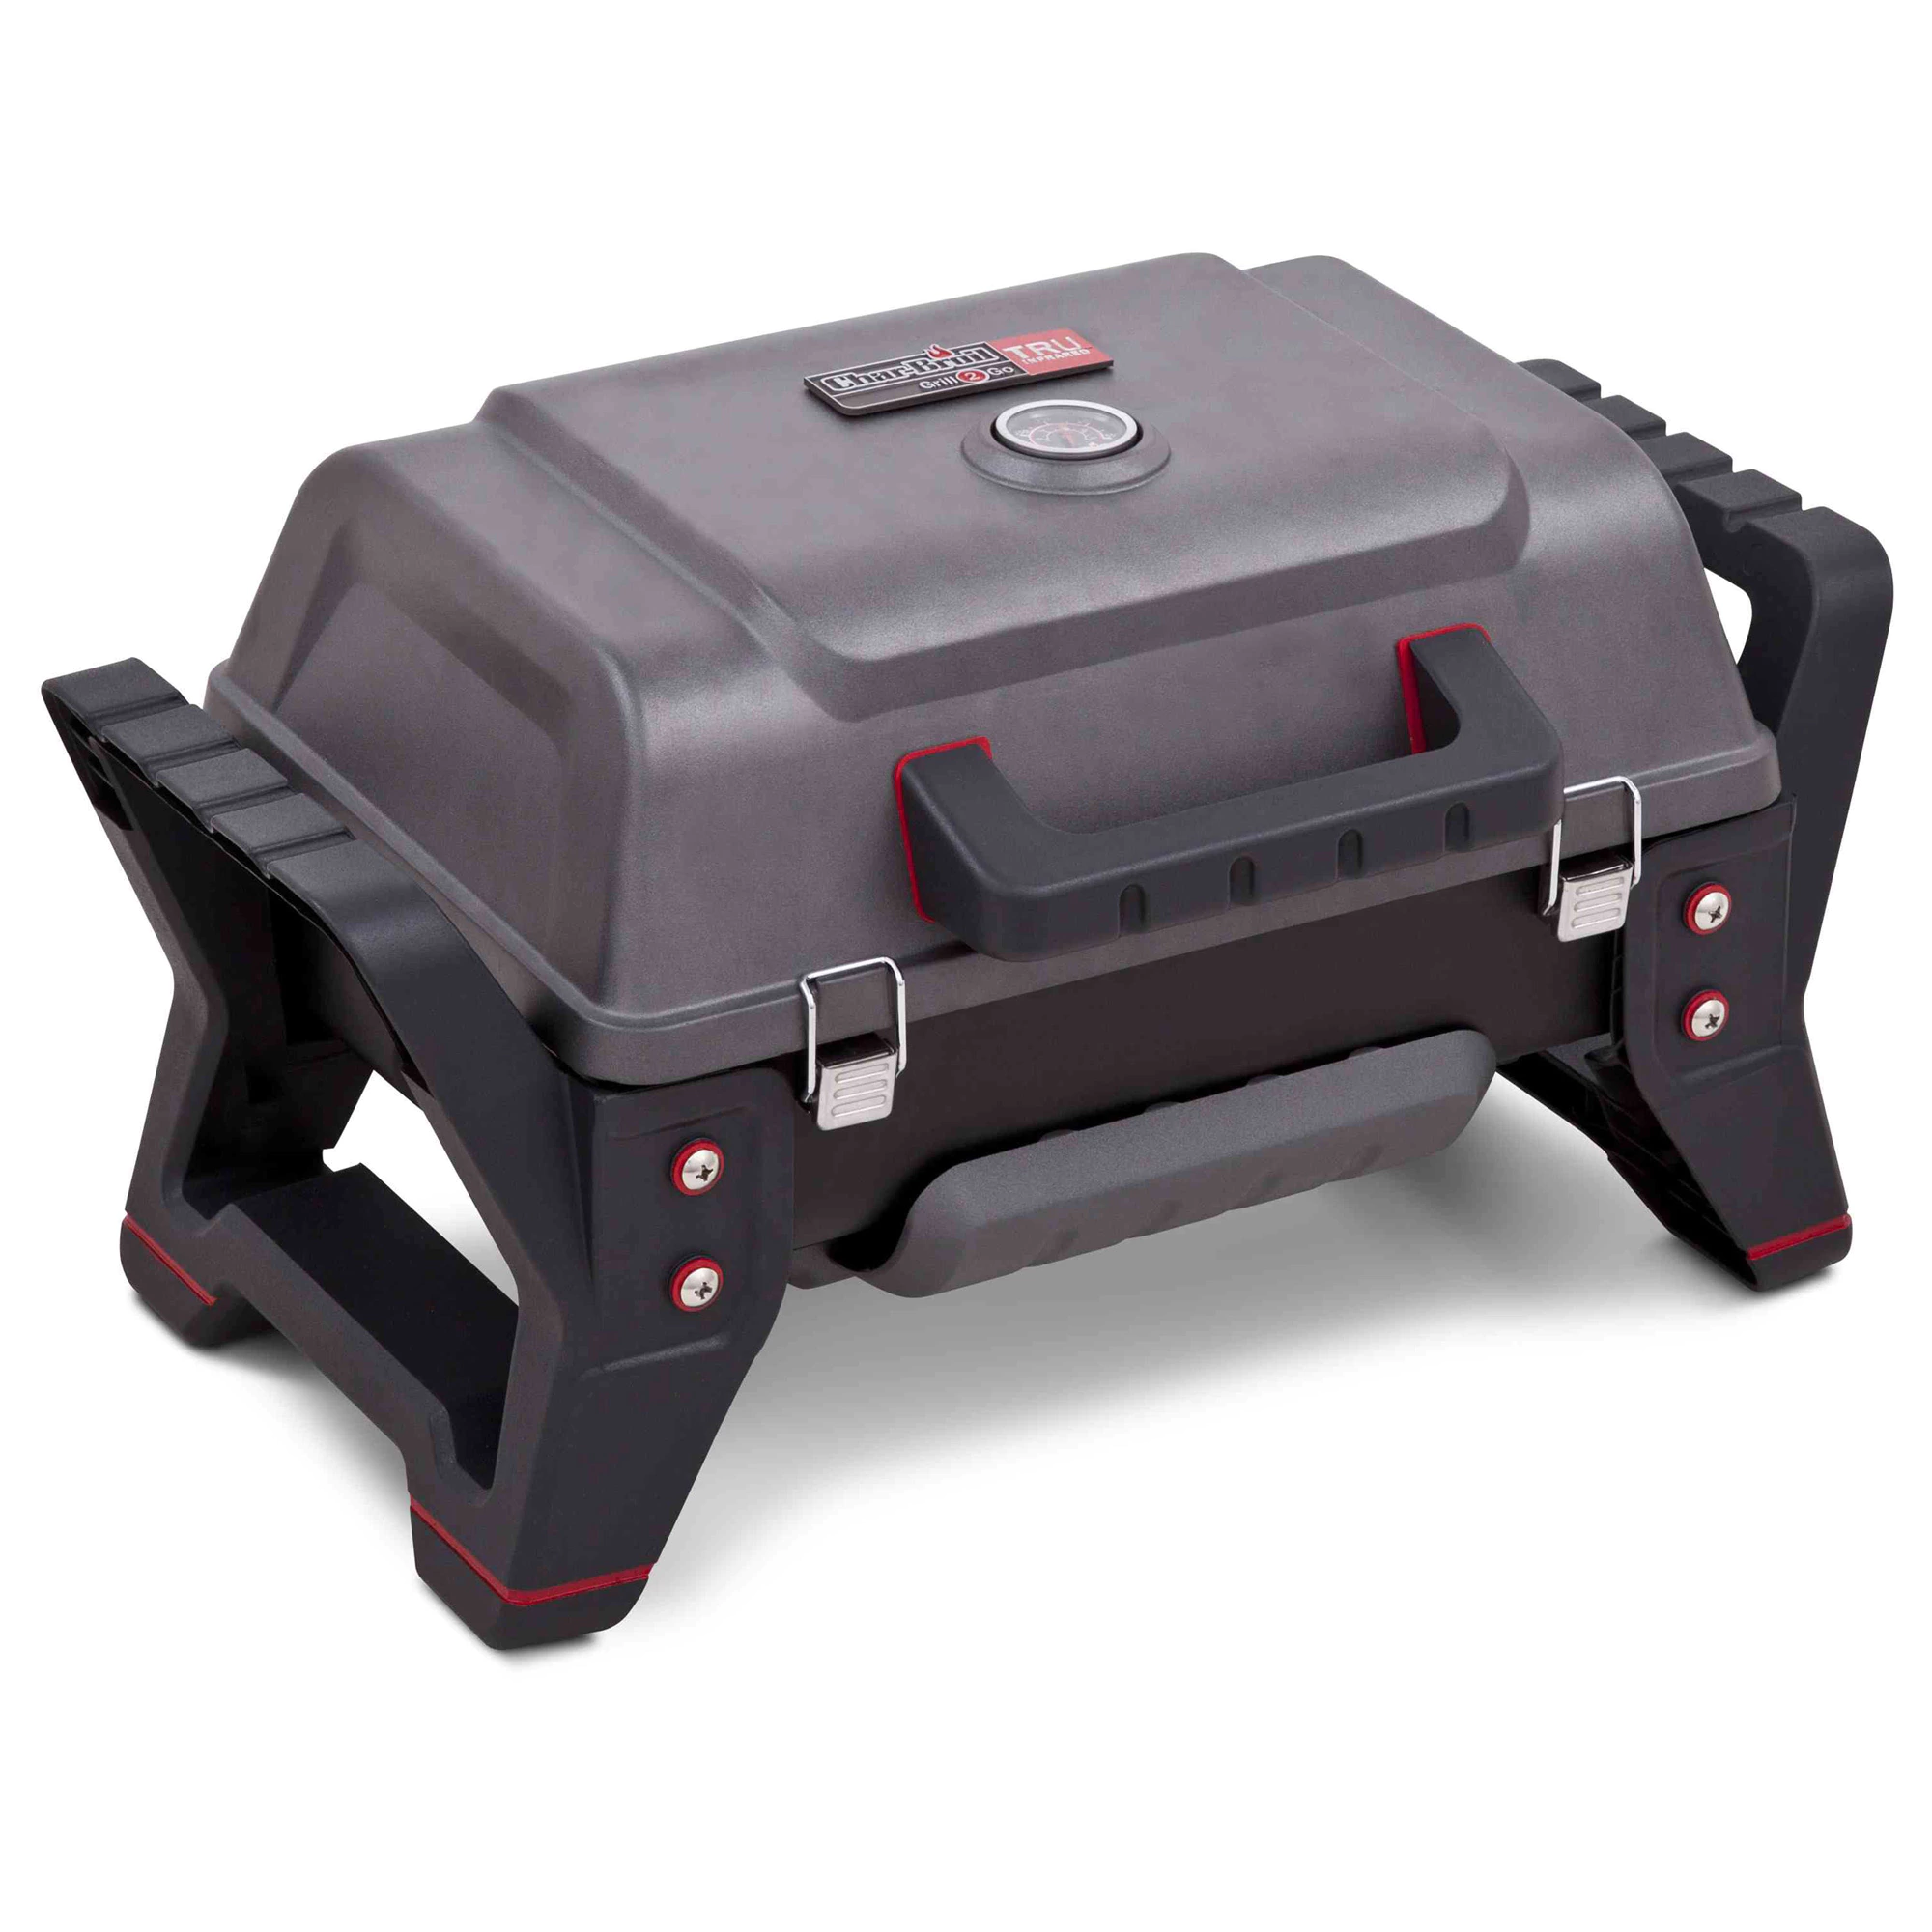 Char-broil Tru-Infrared grill2go x200 gas tabletop grill for $77